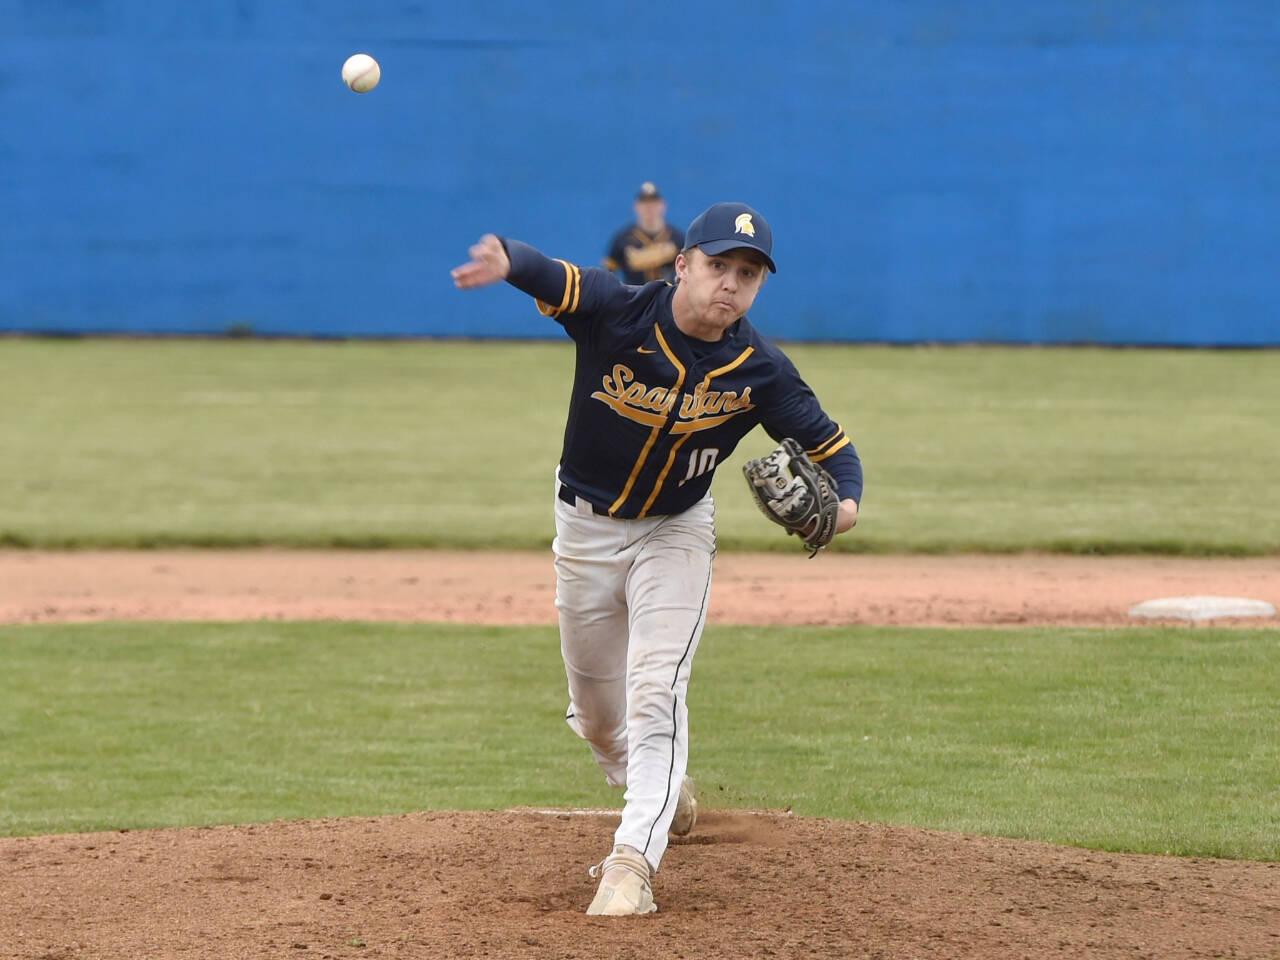 Forks’ Logan Olson pitches a shutout against Ilwaco in the Southwest 2B district tournament Friday. Olson finished with nine strikeouts in a 7-0 win. (Jordan Nailon/Longview Daily News)